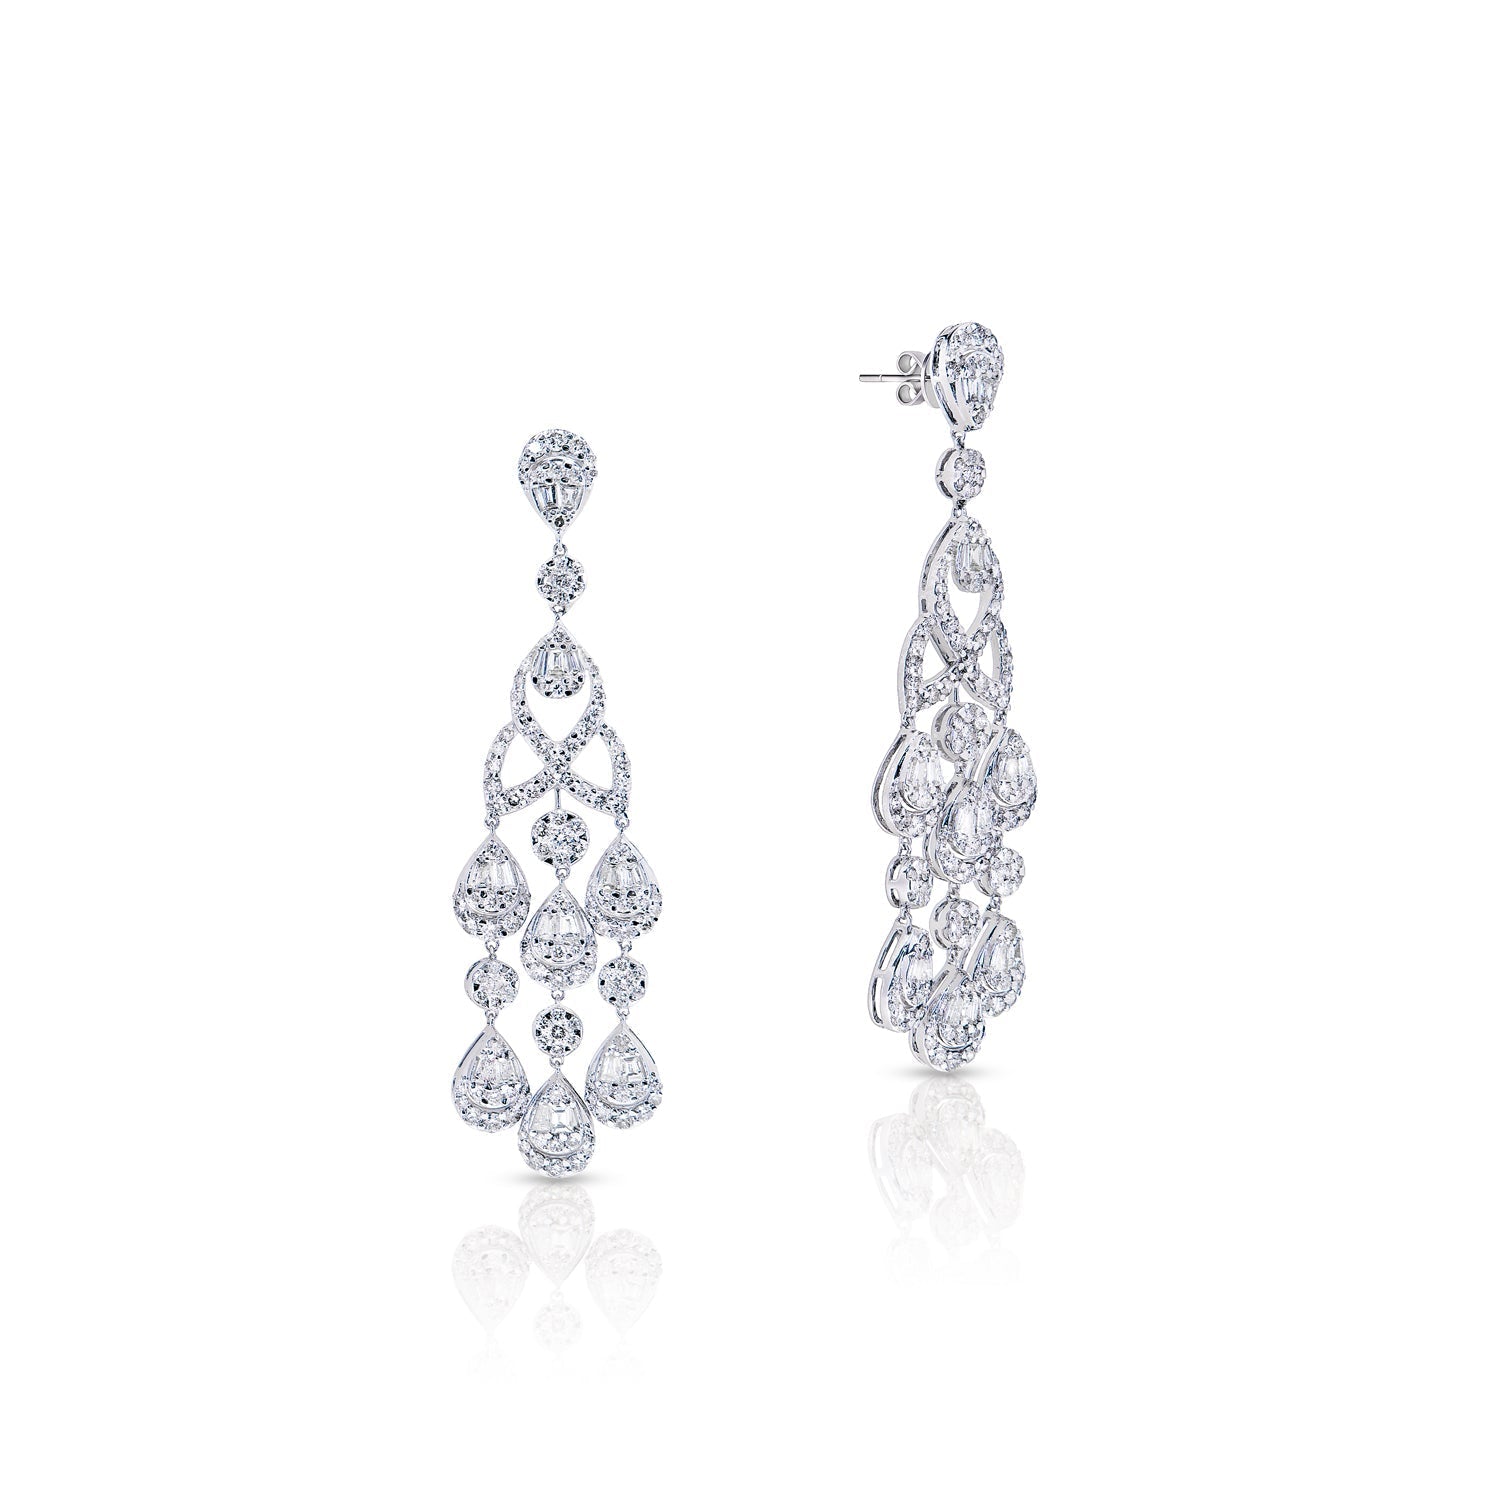 Kailani 6 Carat Combine Mix Shape Diamond Chandelier Earrings in 14k White Gold Front and Side View